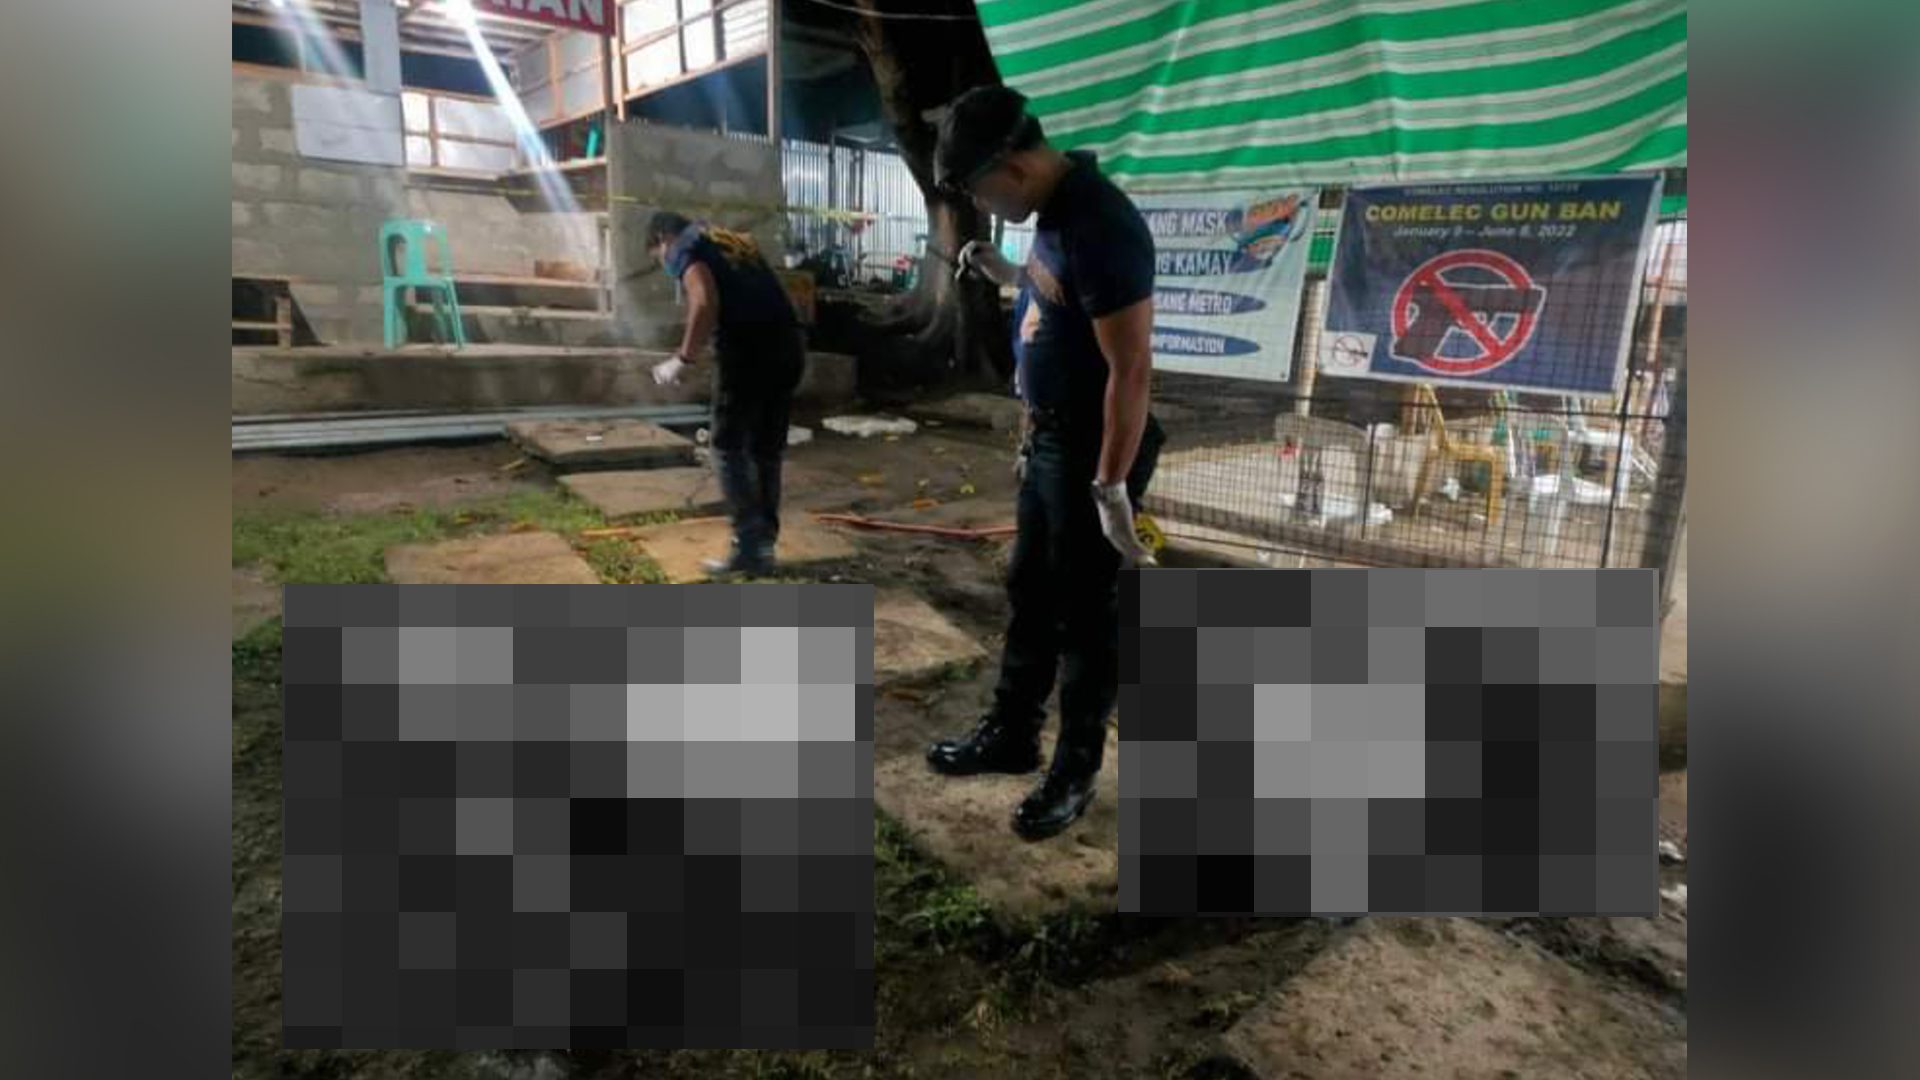 4 killed, 2 wounded in suspected Batangas assassination attempt